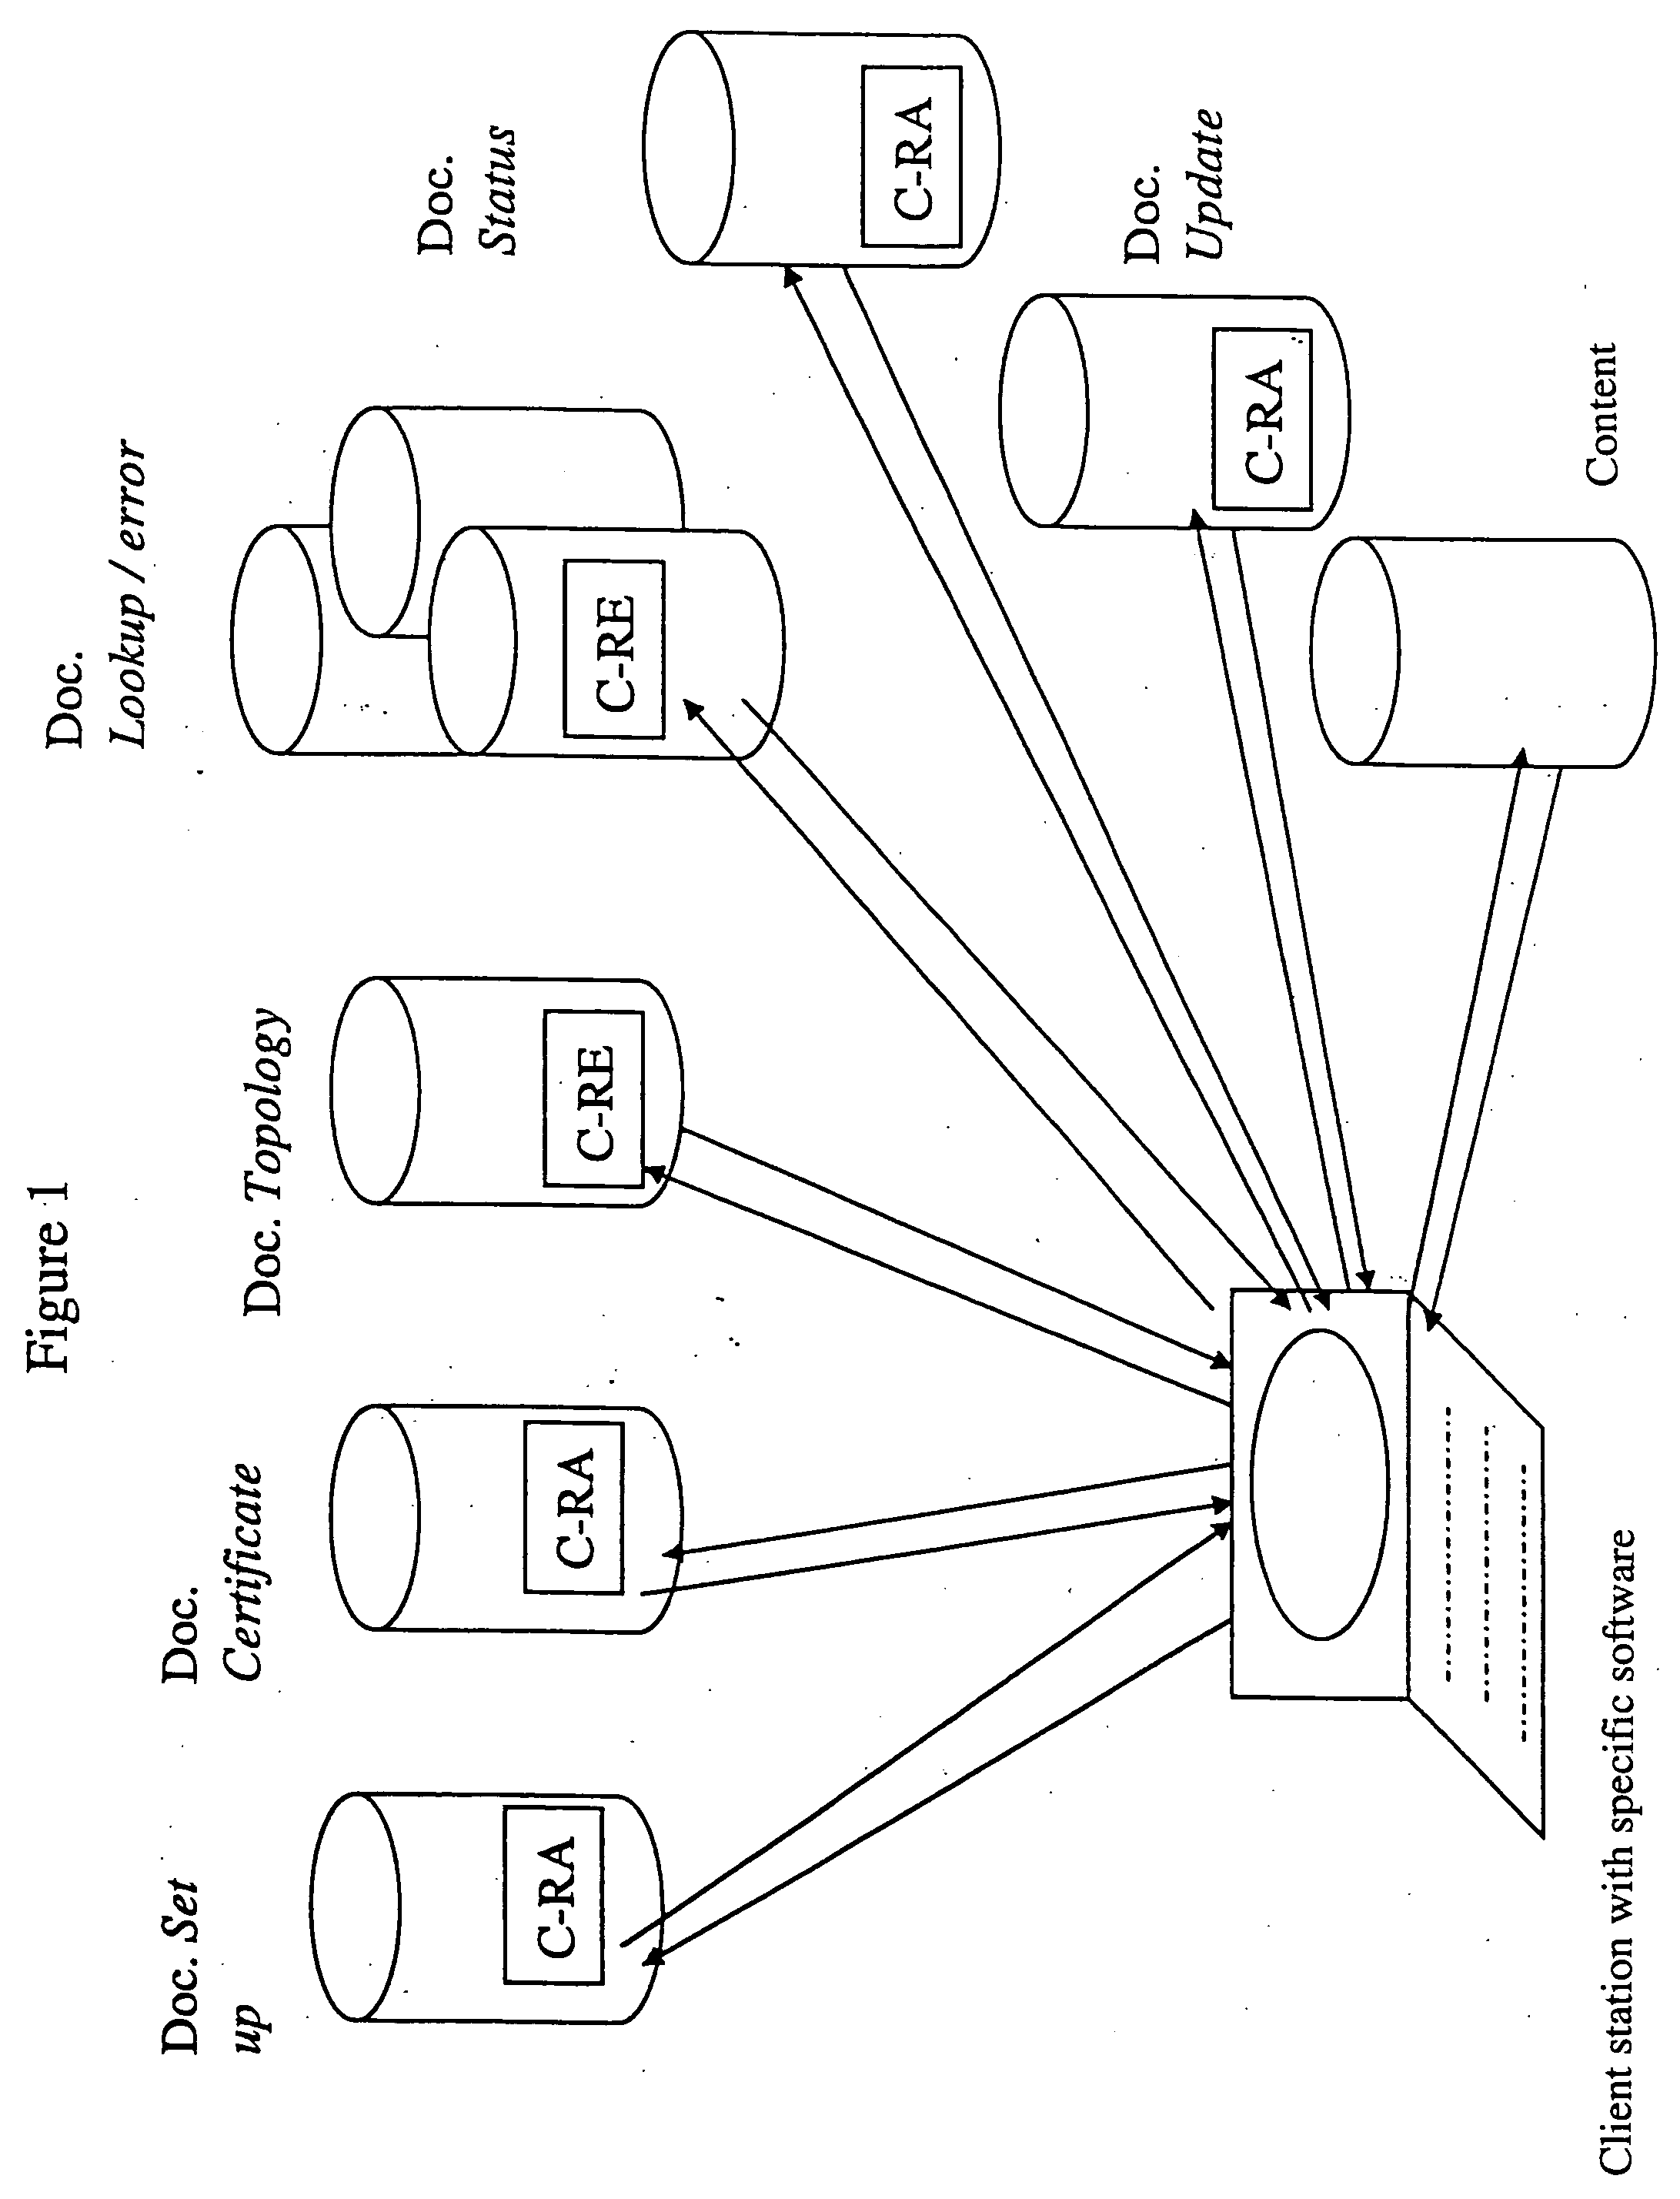 Method and system for operation of a computer network intended for the publication of content